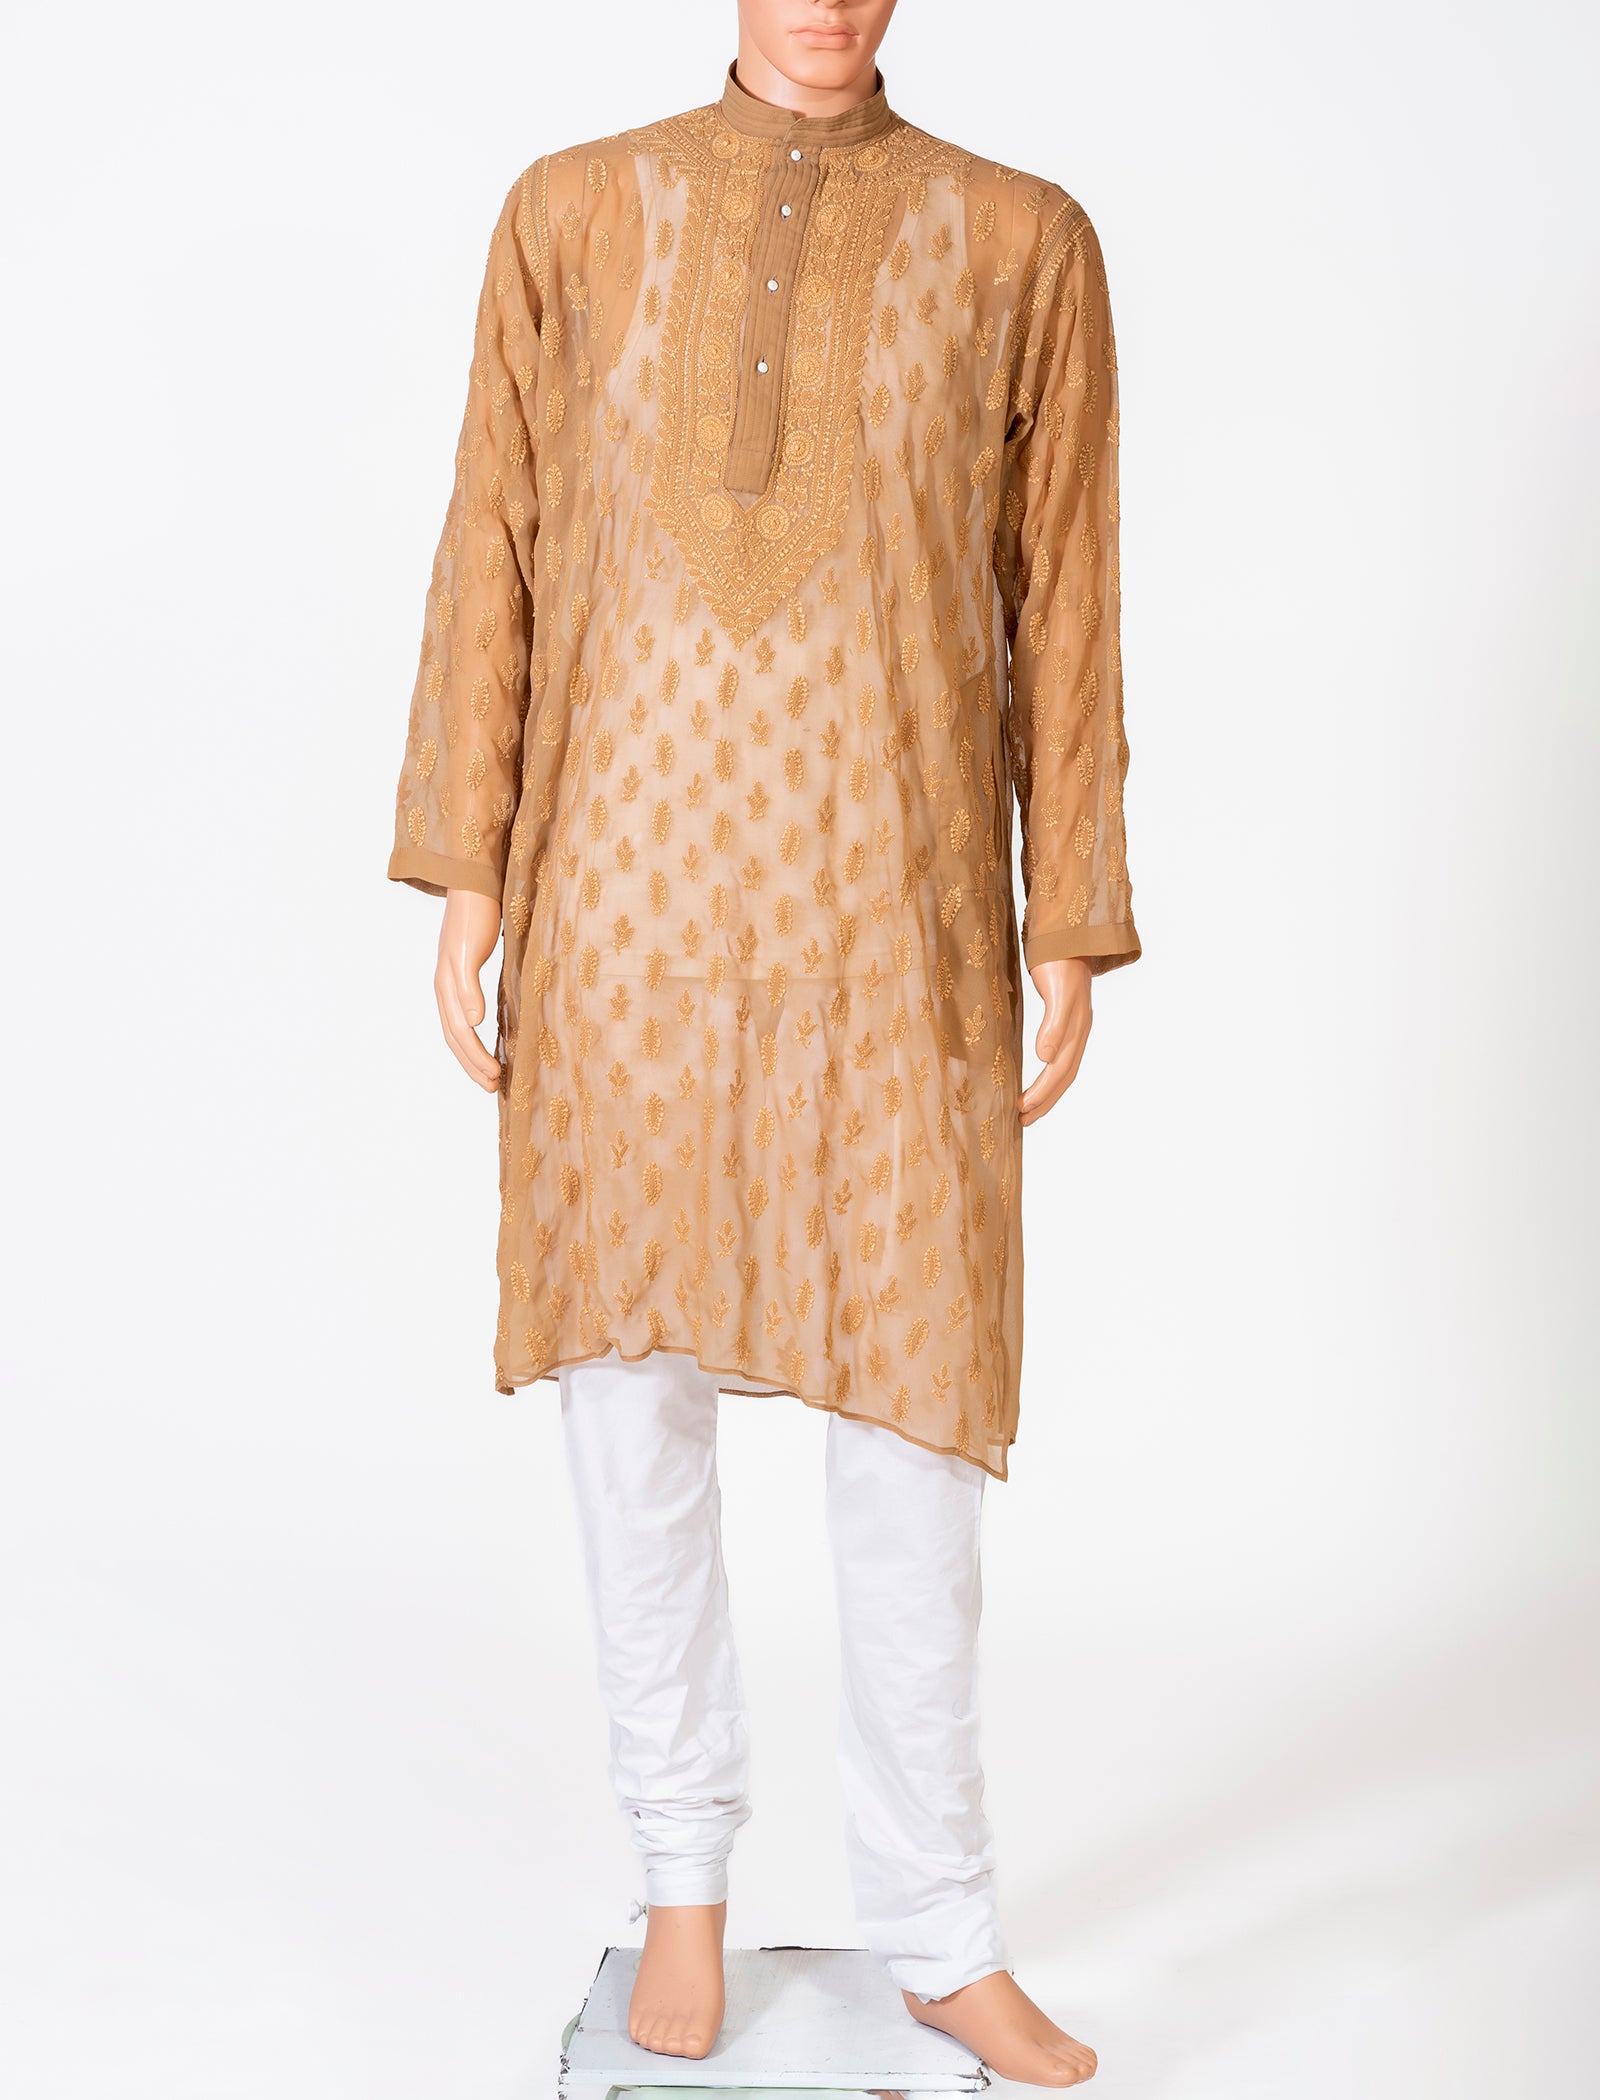 Lucknow Chikan Emporium Georgette Coffee Brown  Colour Gents Kurta With Self Stripes And Fancy Hand Chikankari On Neck.